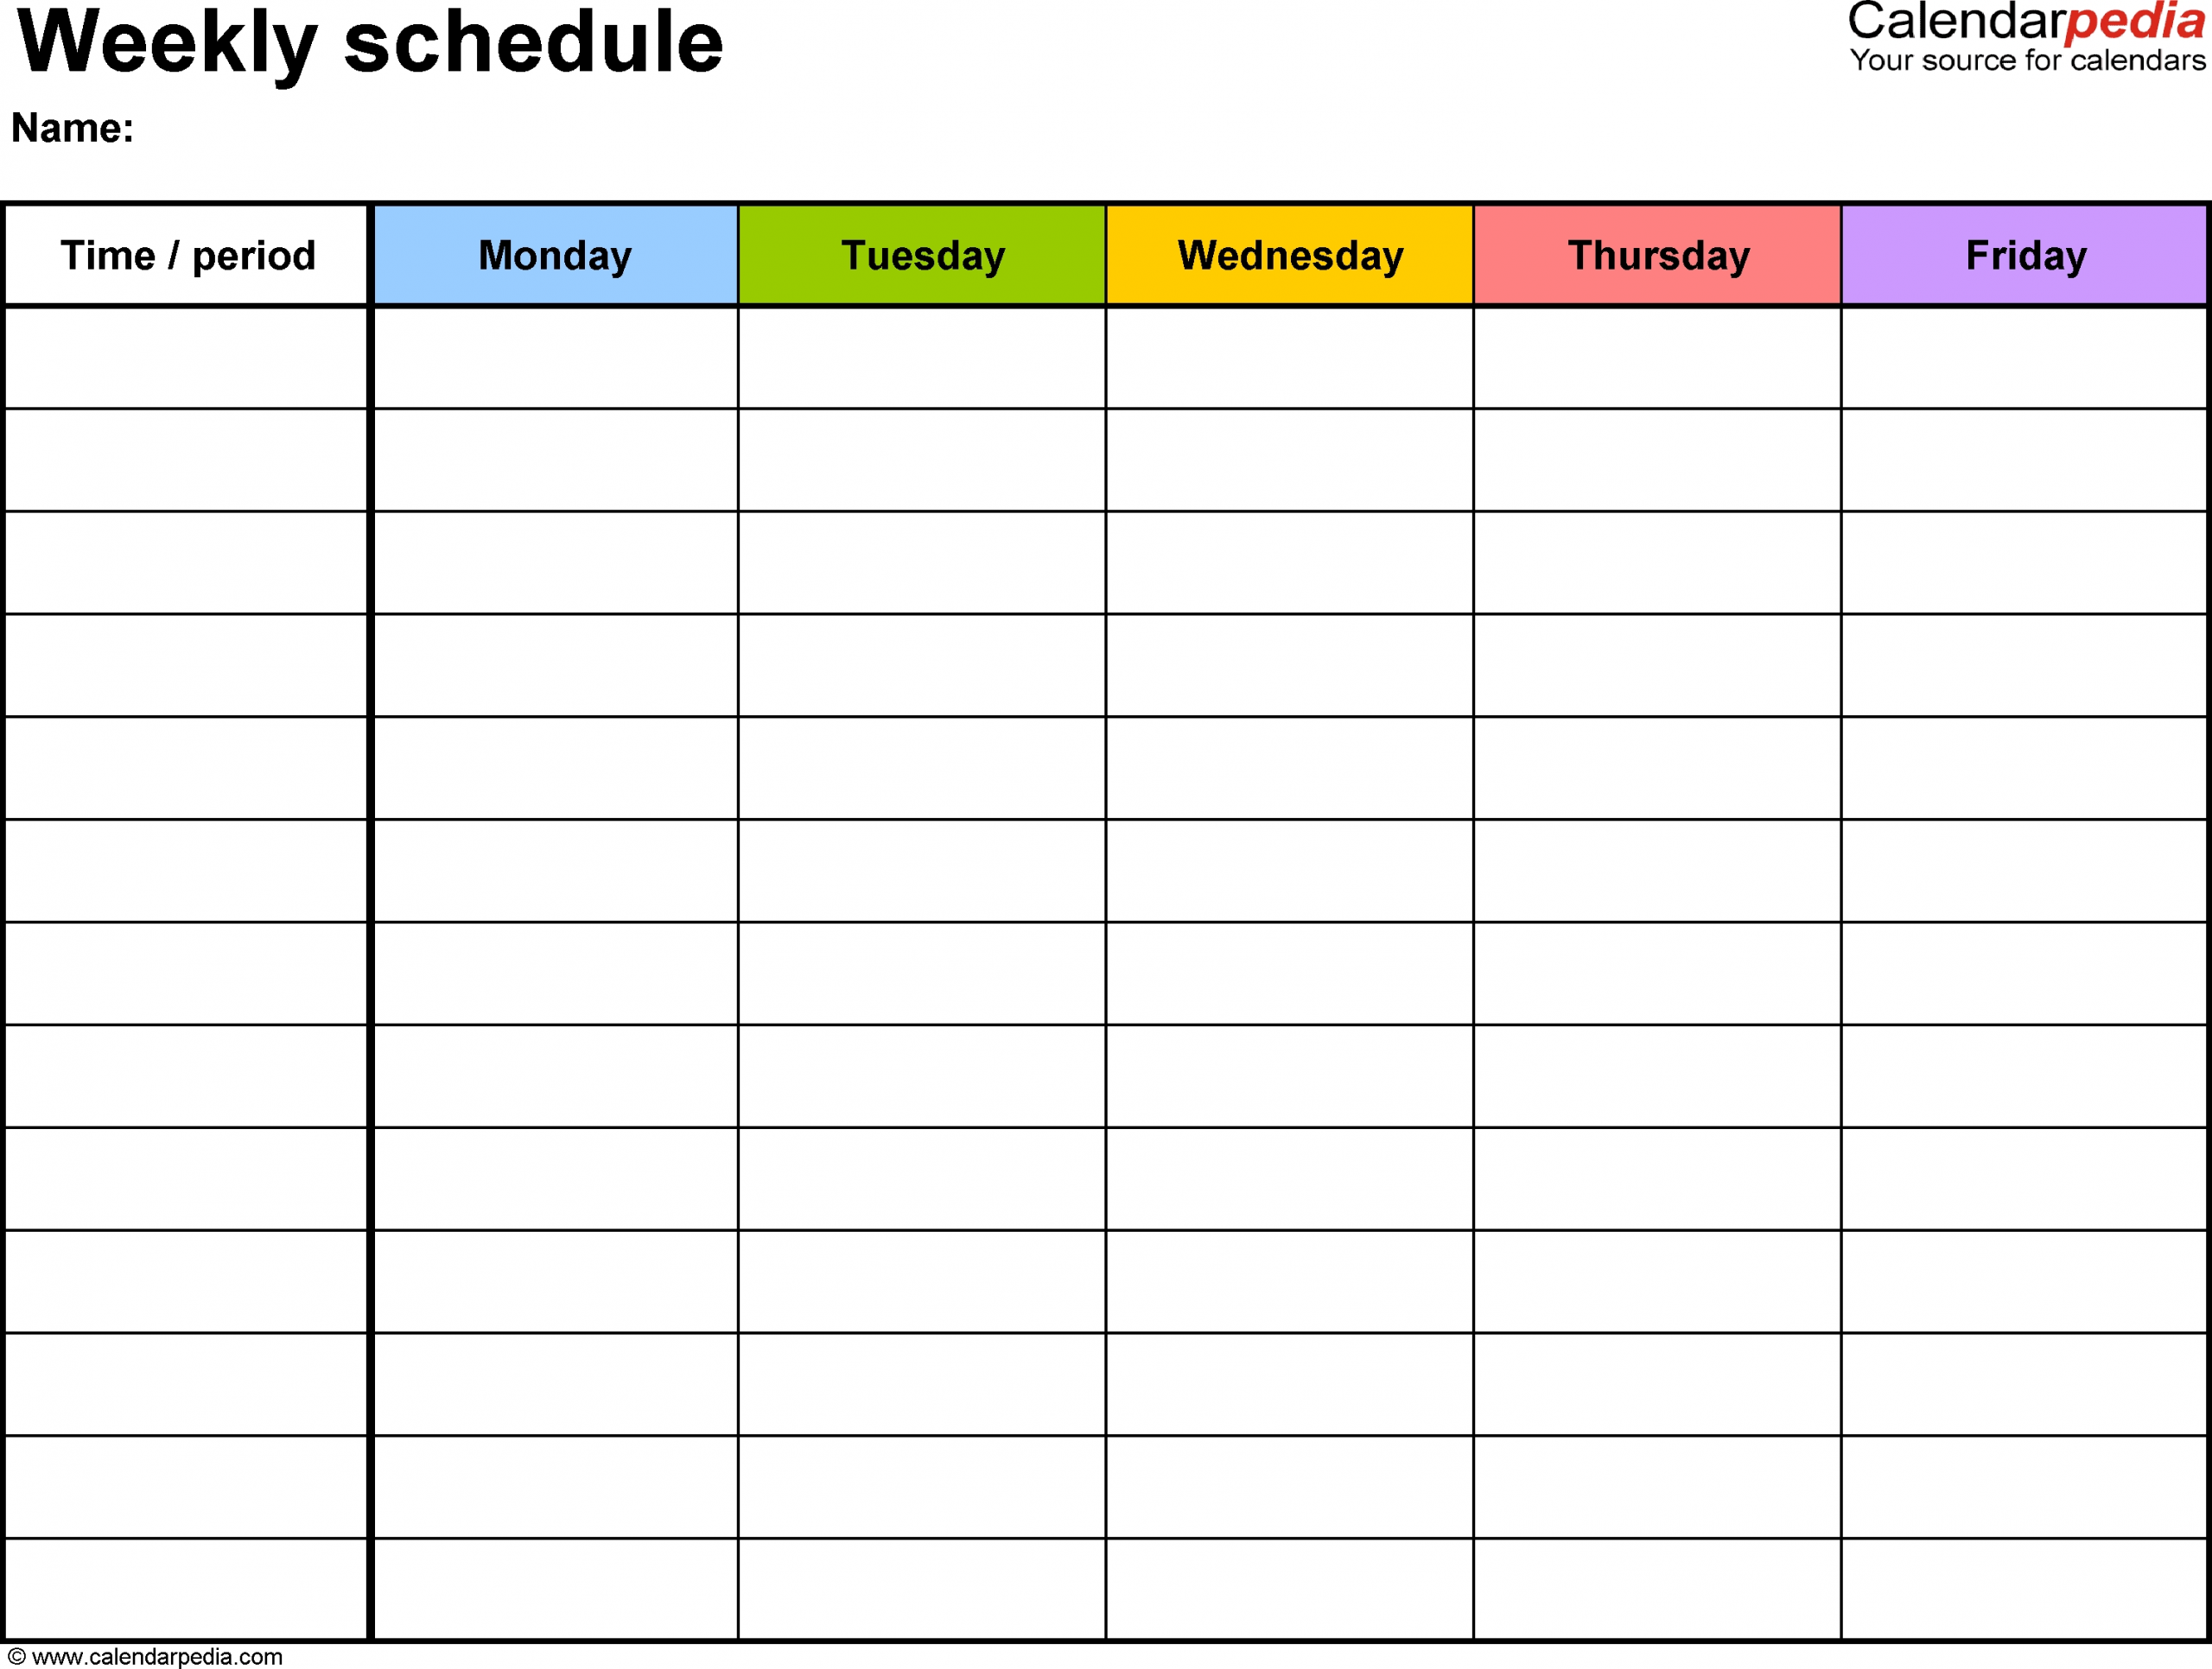 Free Weekly Schedule Templates For Word - 18 Templates pertaining to Monday Through Friday Planner Template